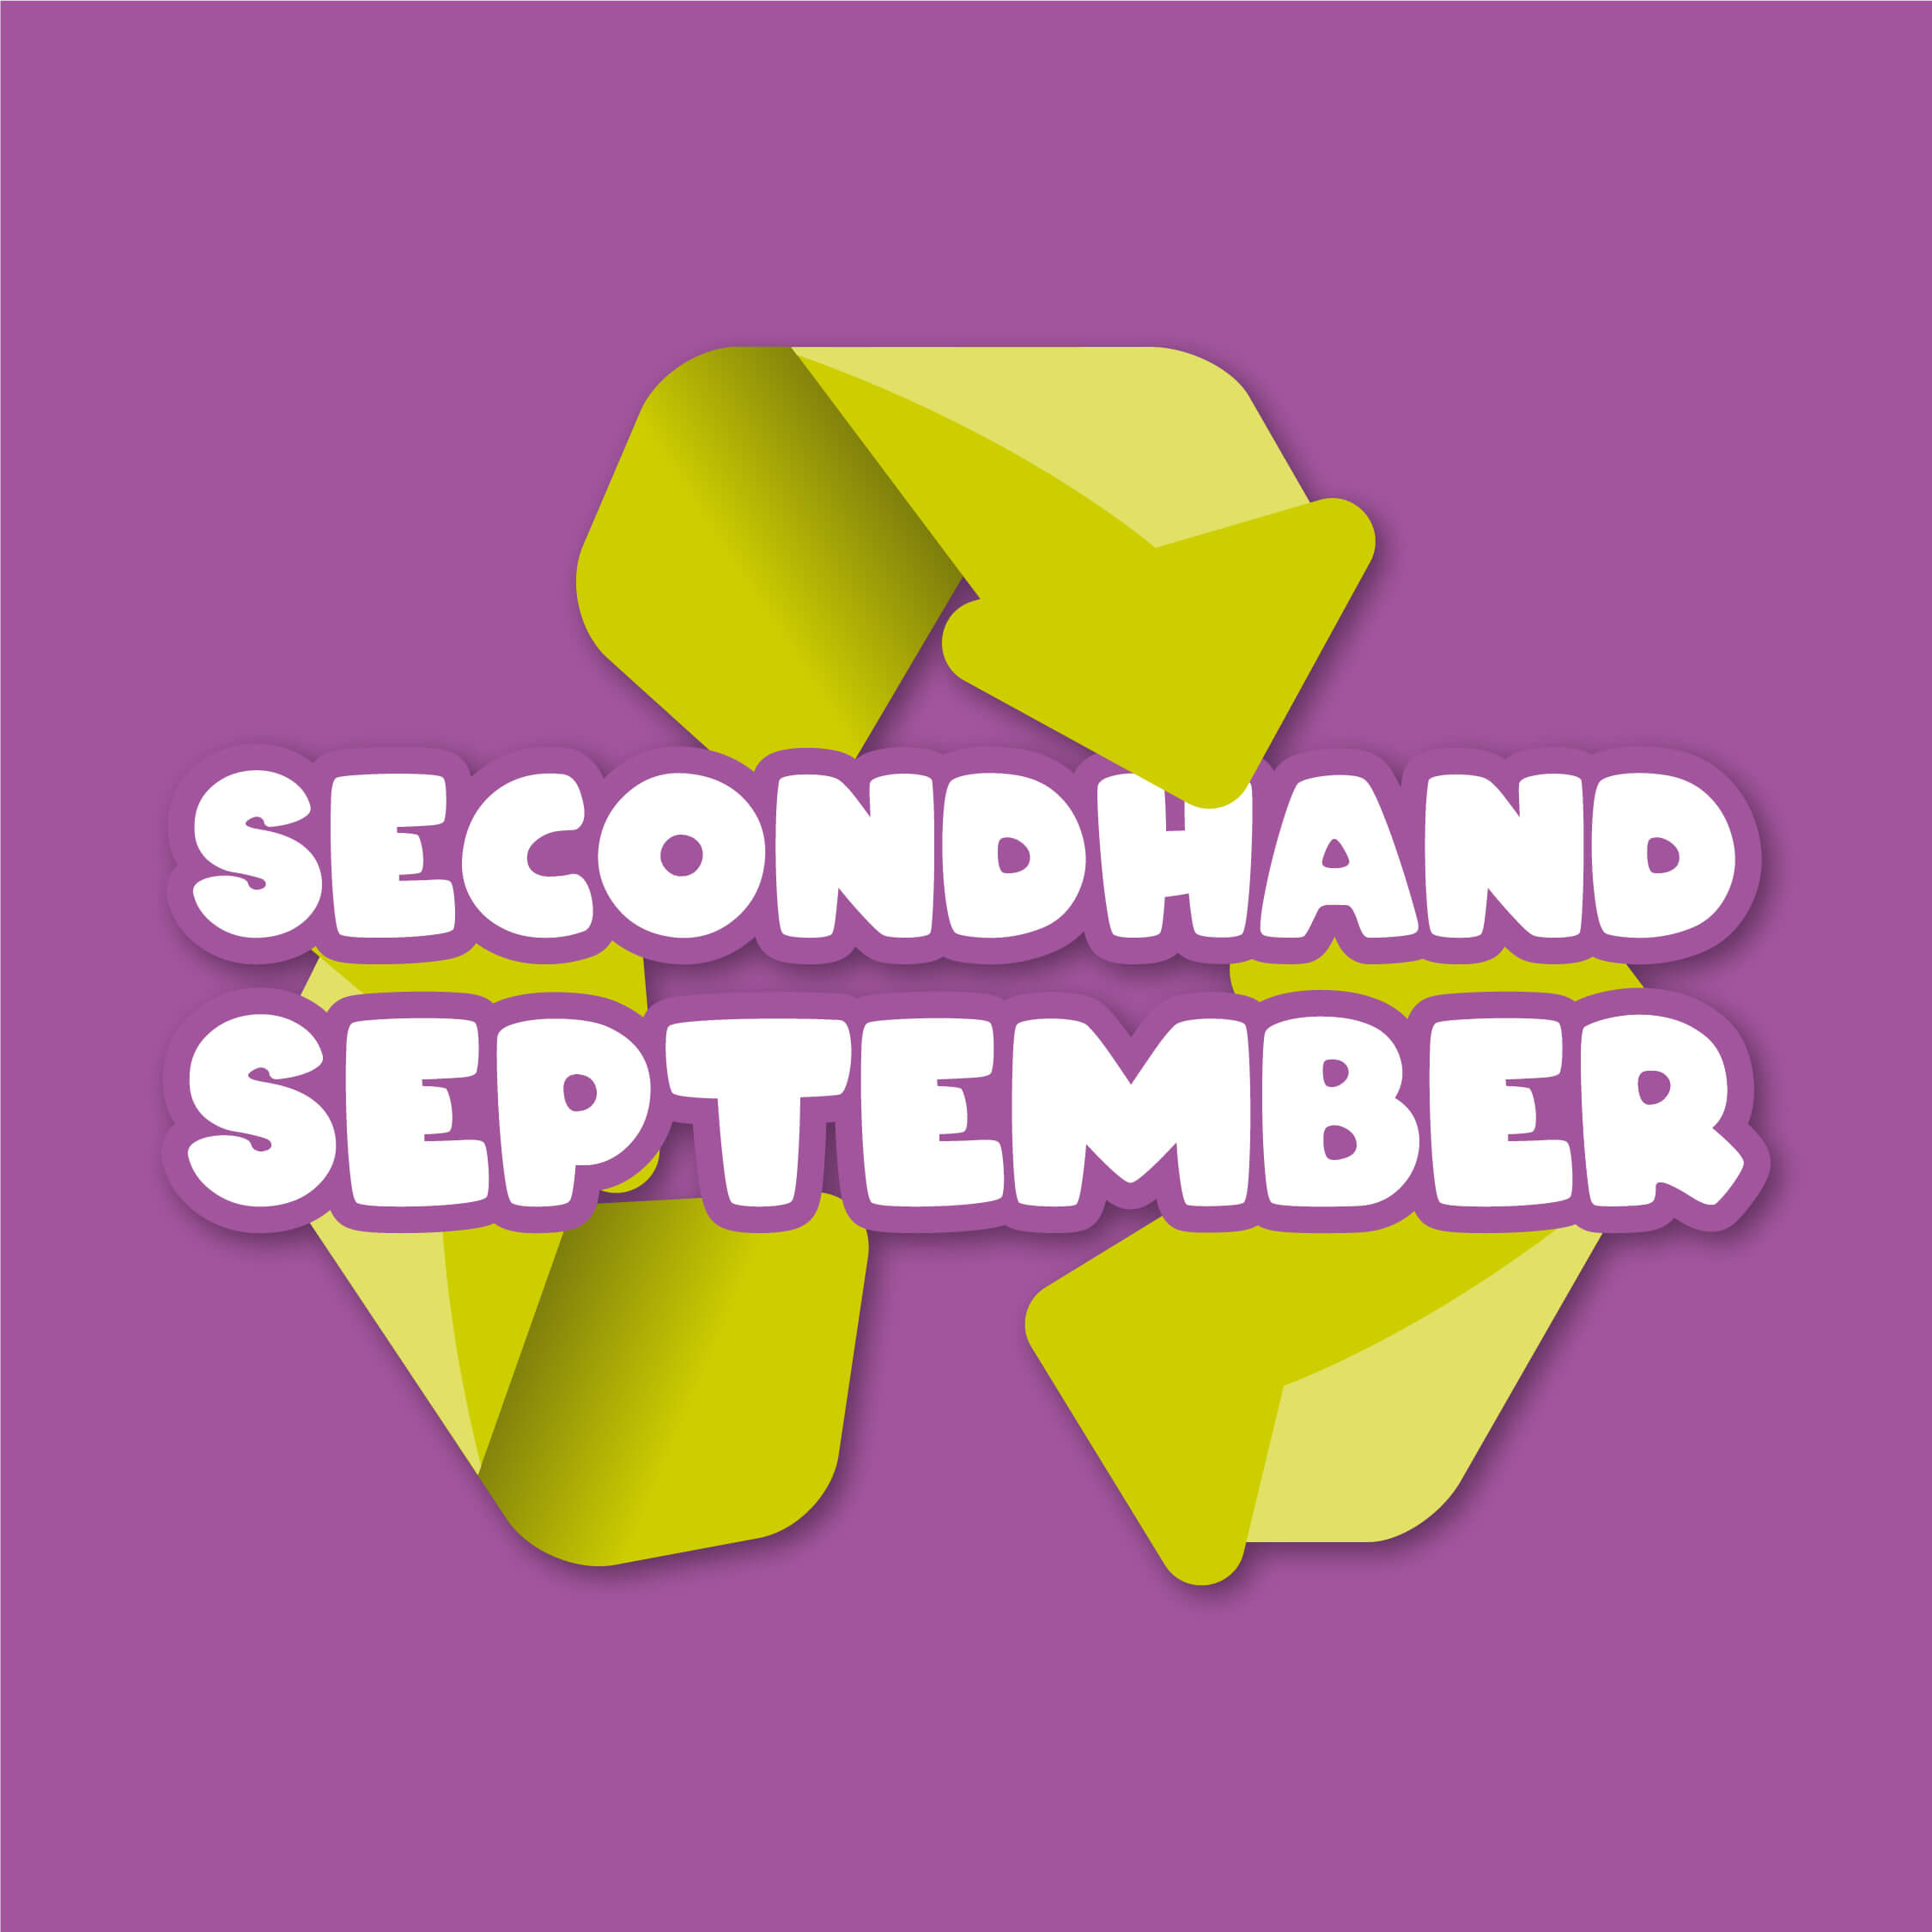 5 ways you can support #SecondhandSeptember